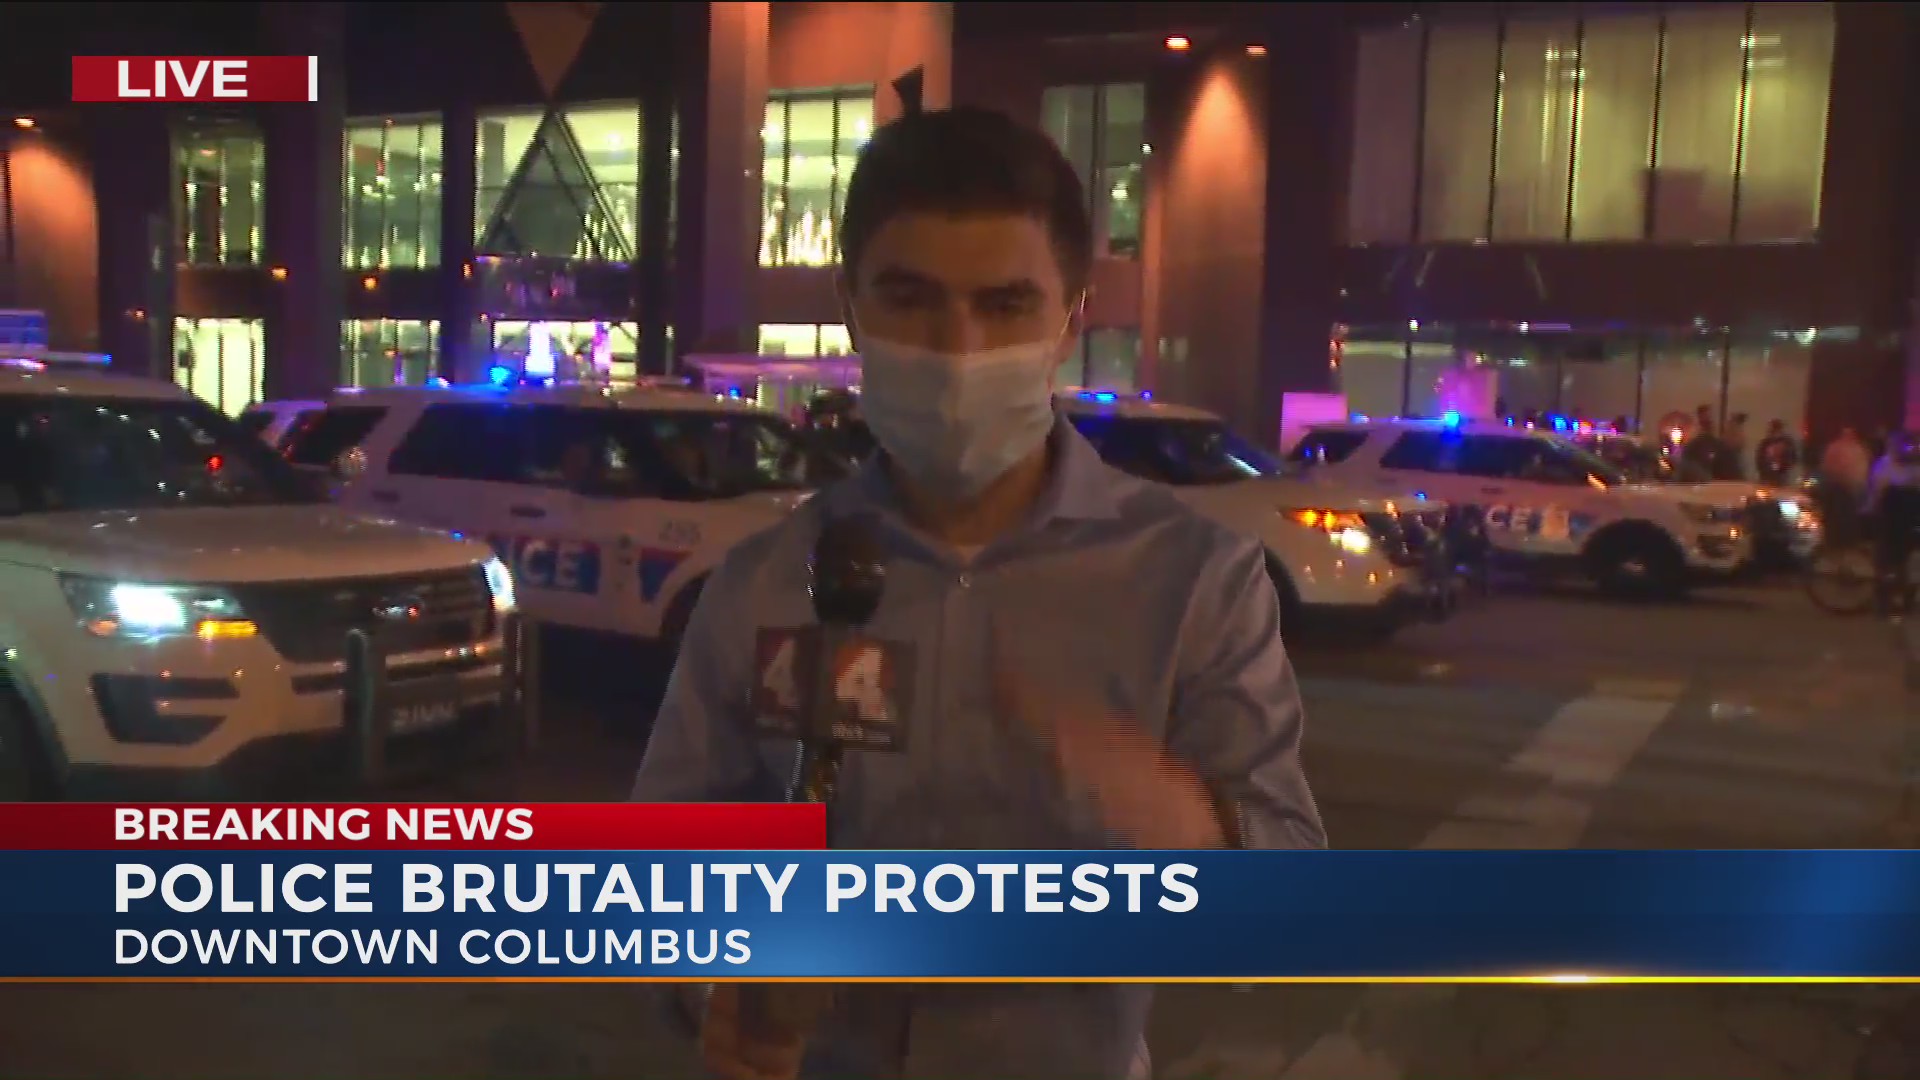 Thumbnail for the video titled "Protest at 11:15 in Columbus"